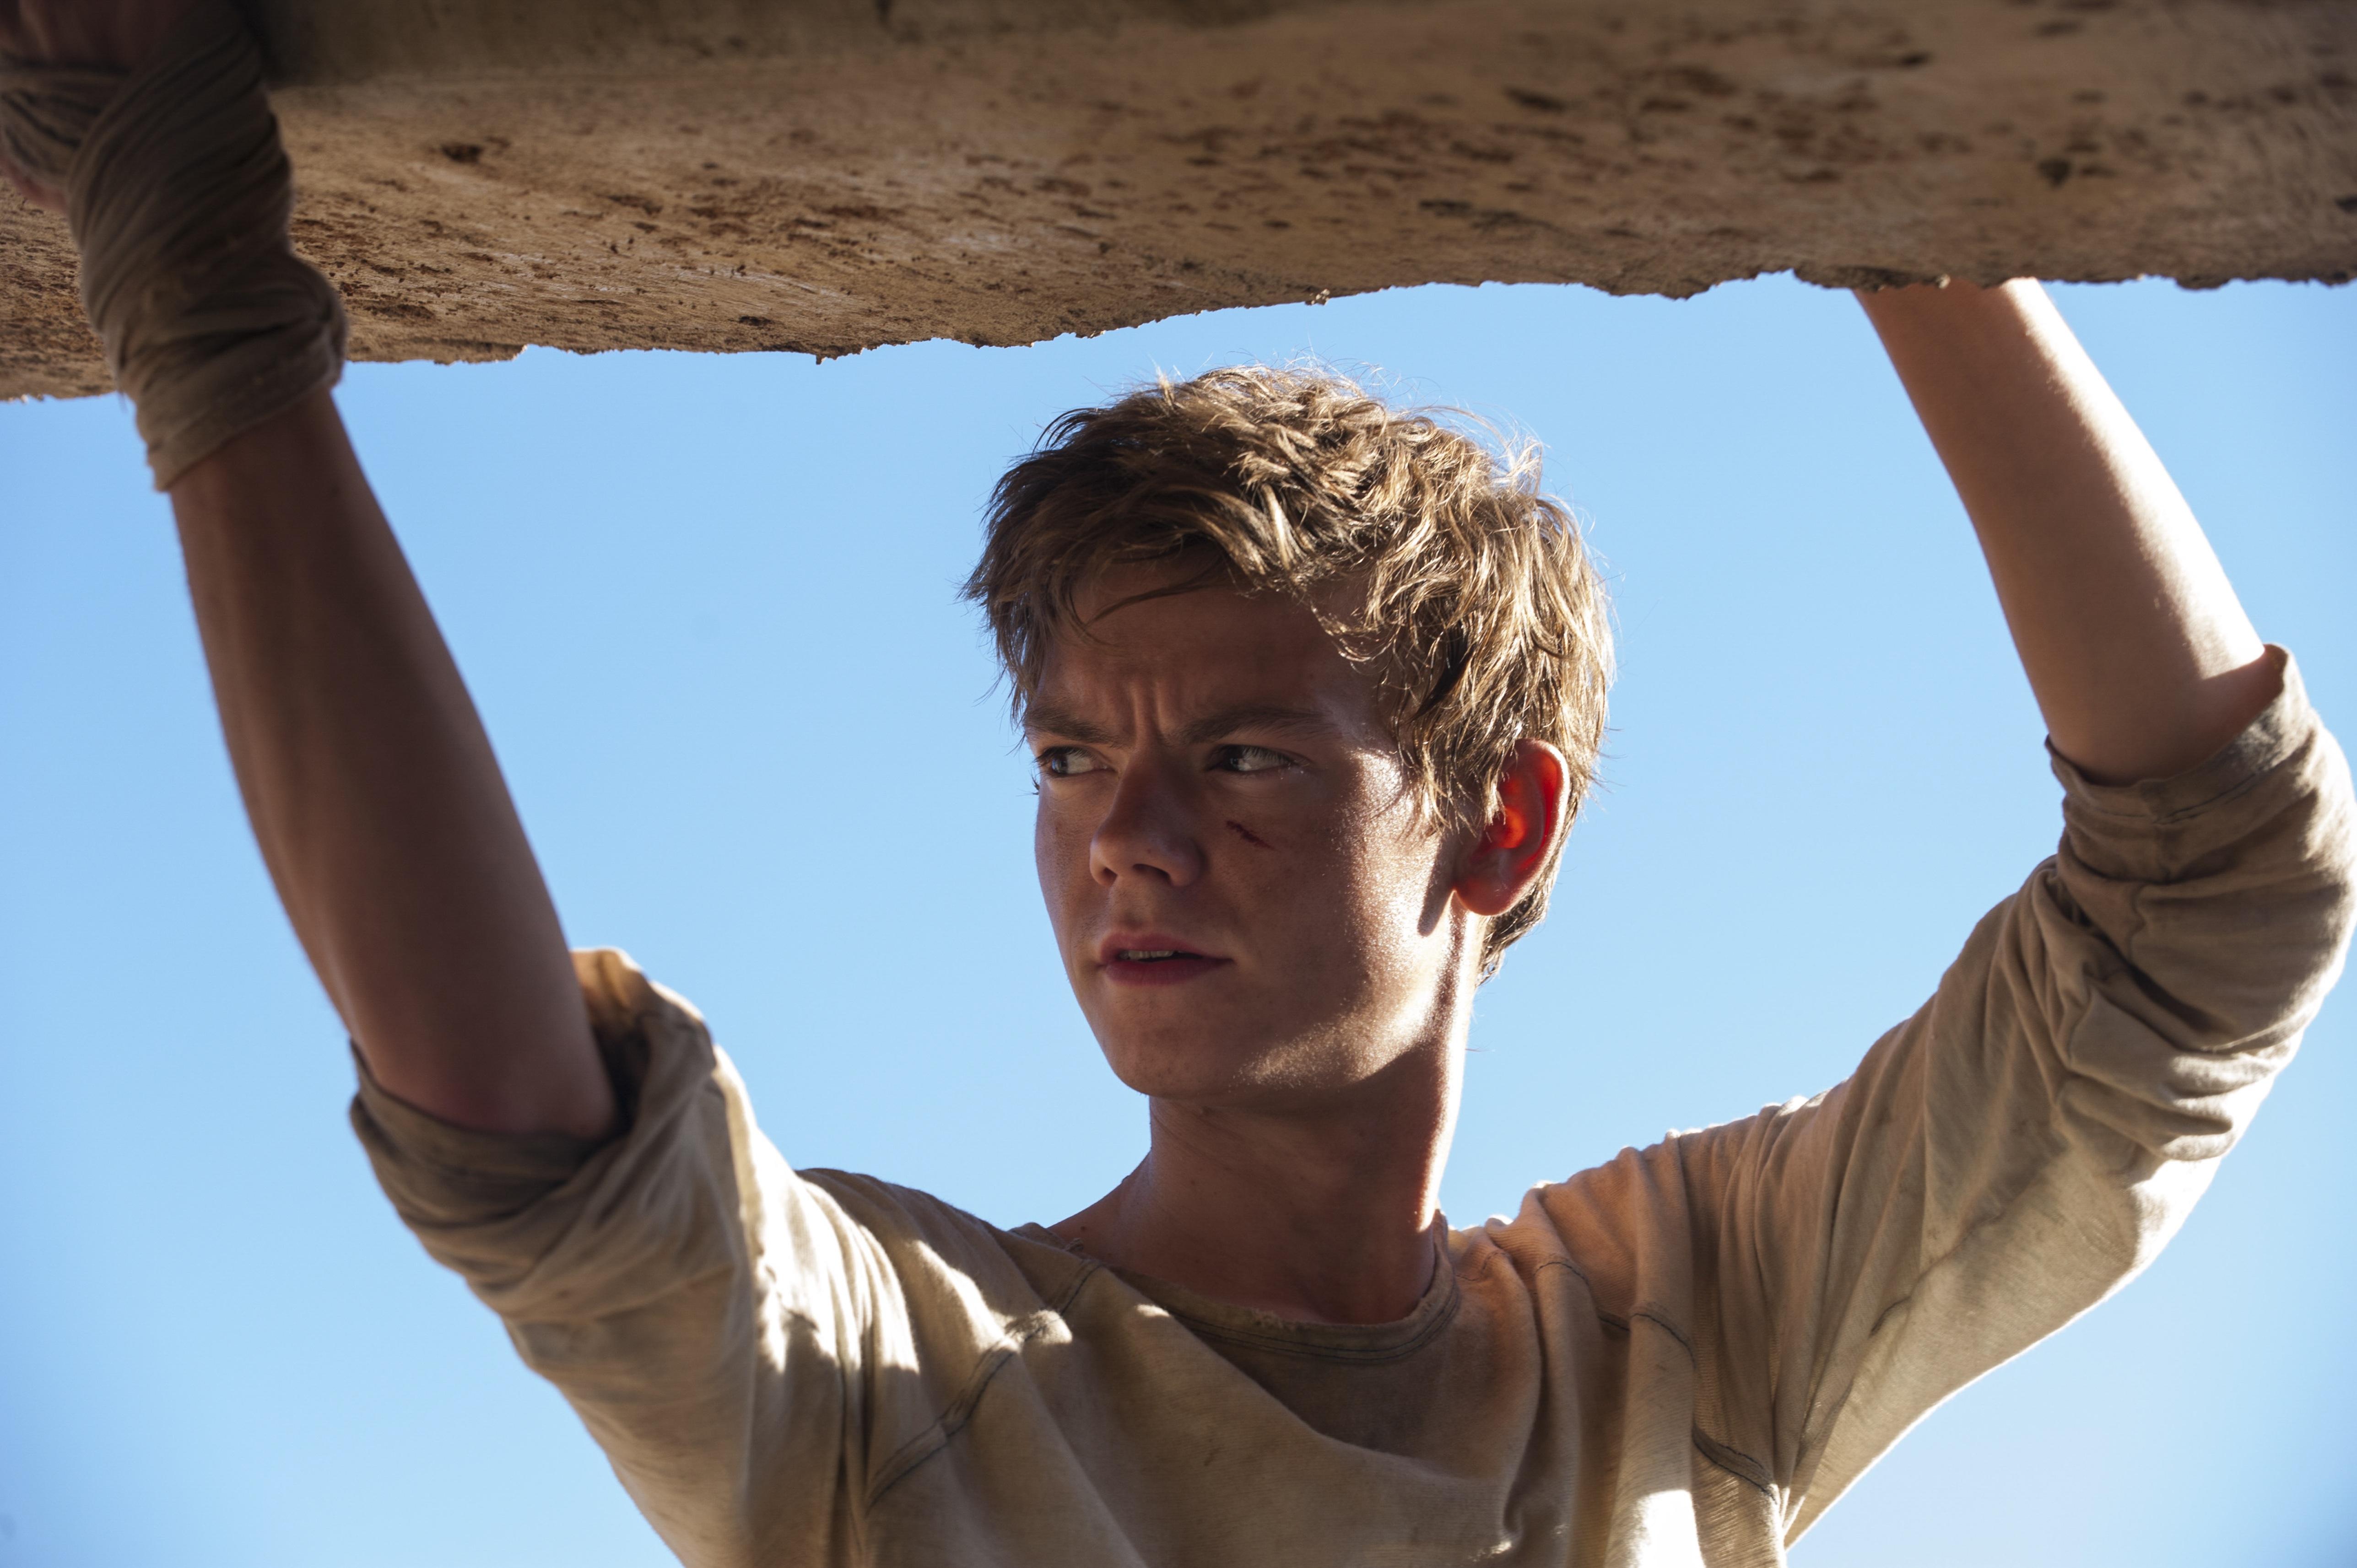 Maze Runner' Thomas Brodie-Sangster explains his cameo in 'Star Wars